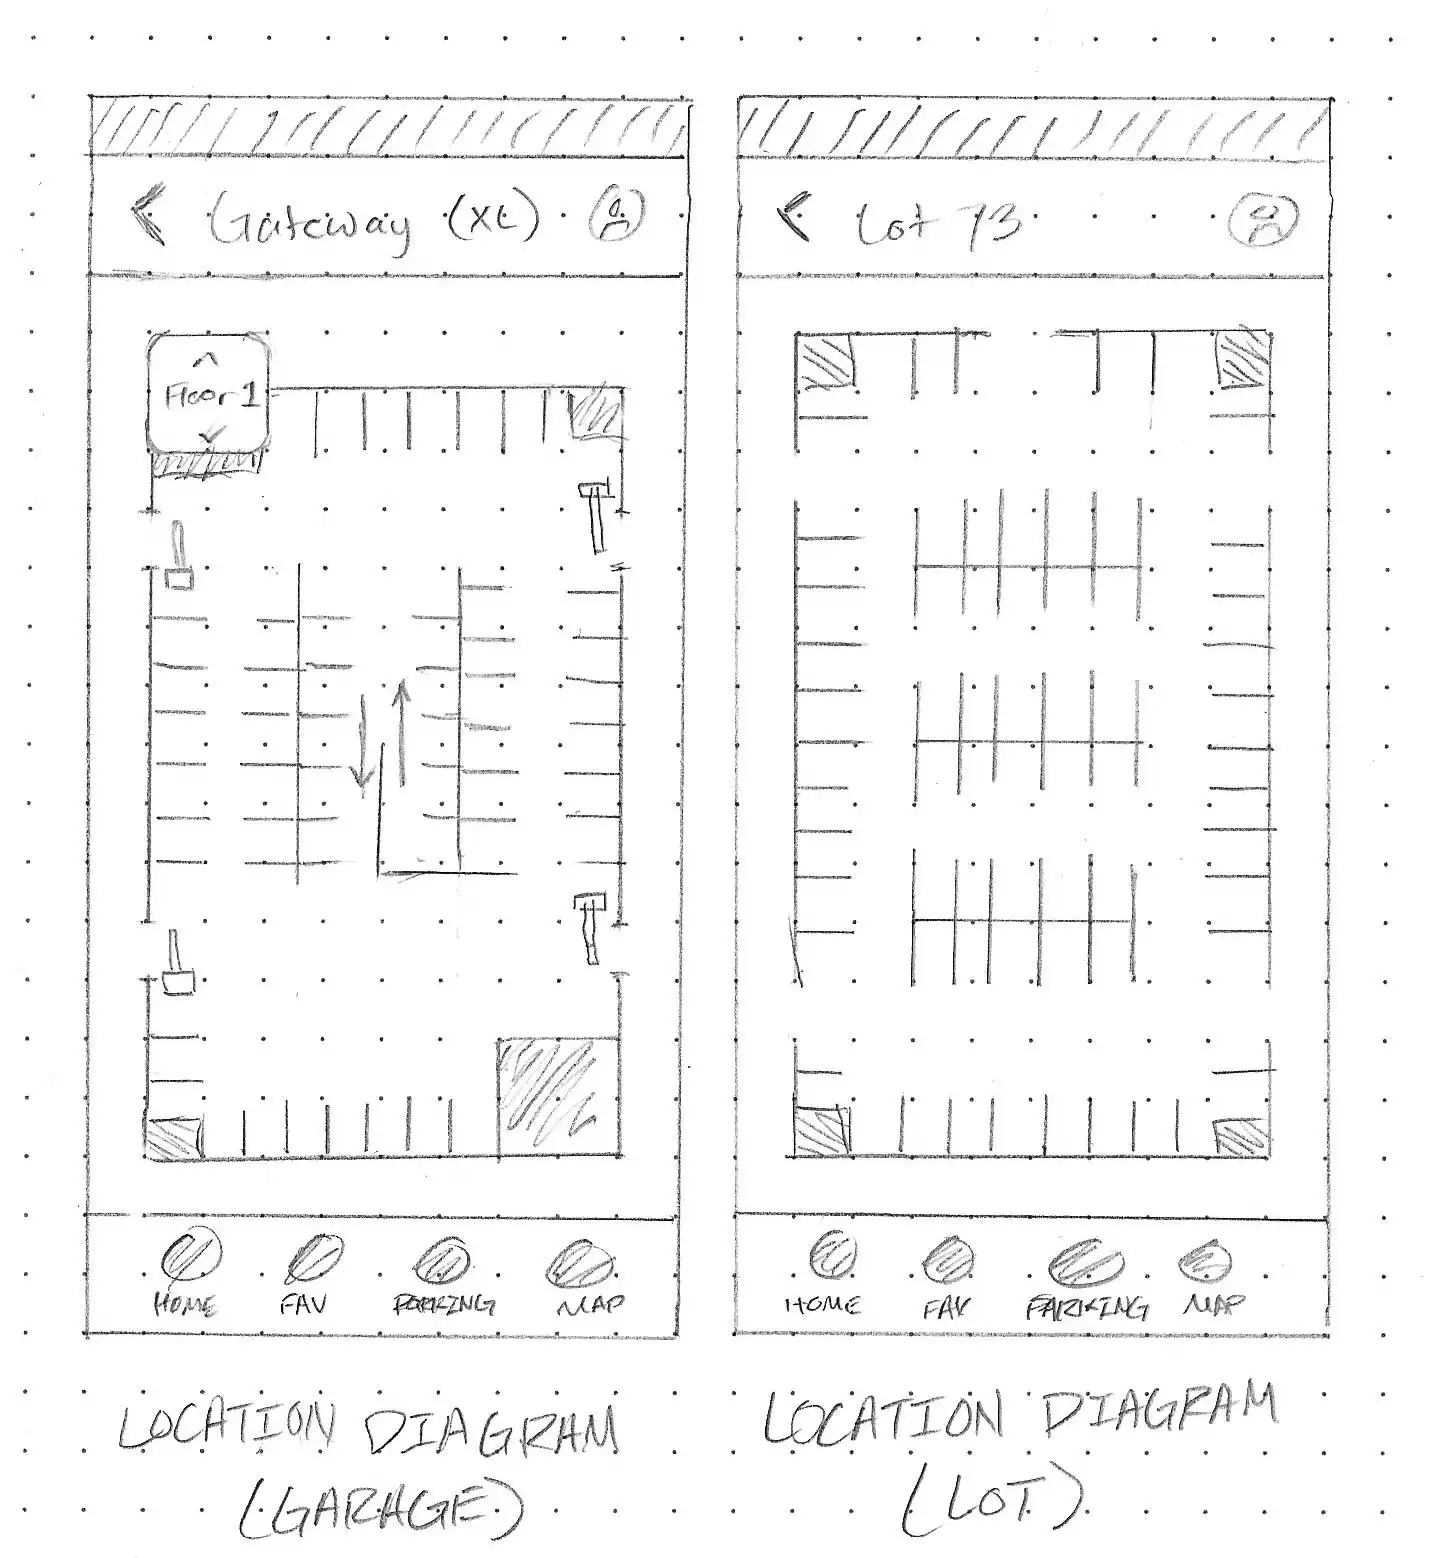 Picture of a hand-drawn diagram of a user interface